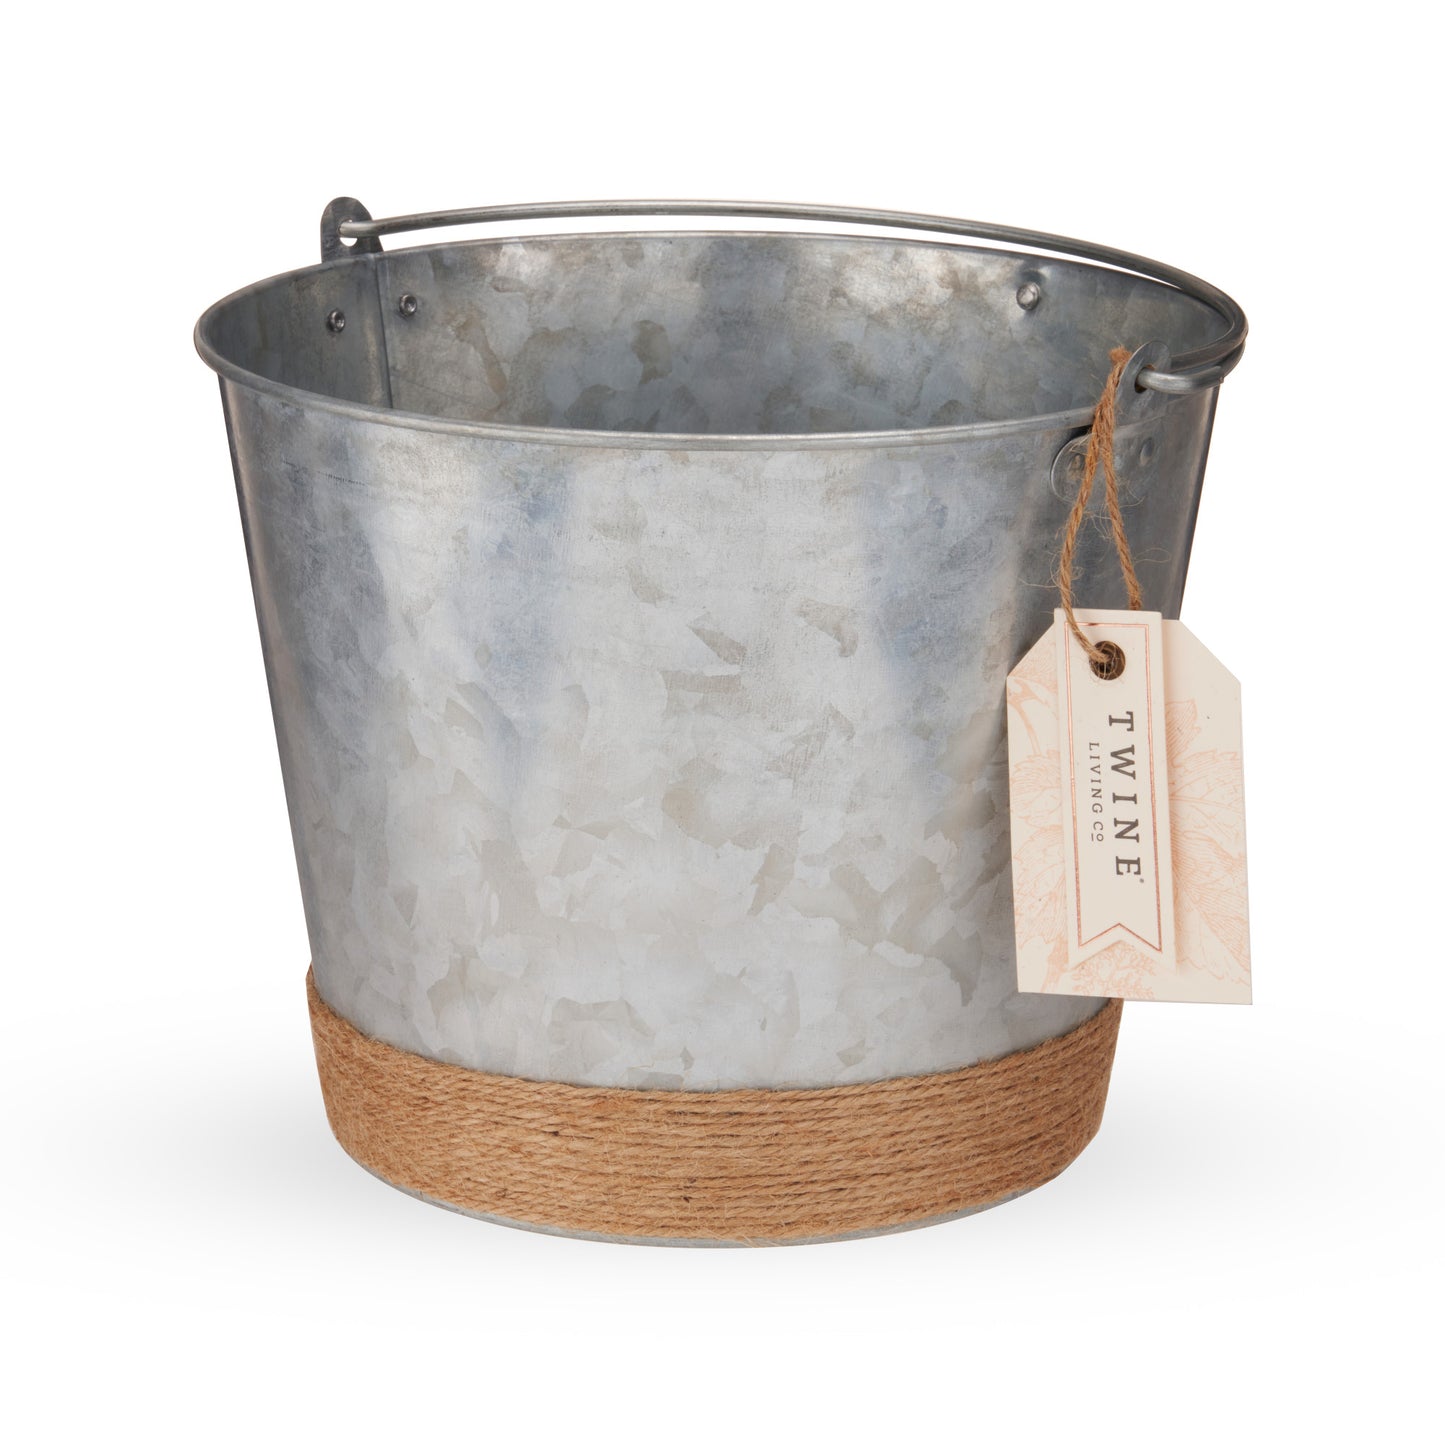 Jute Wrapped Galvanized Ice Bucket by Twine